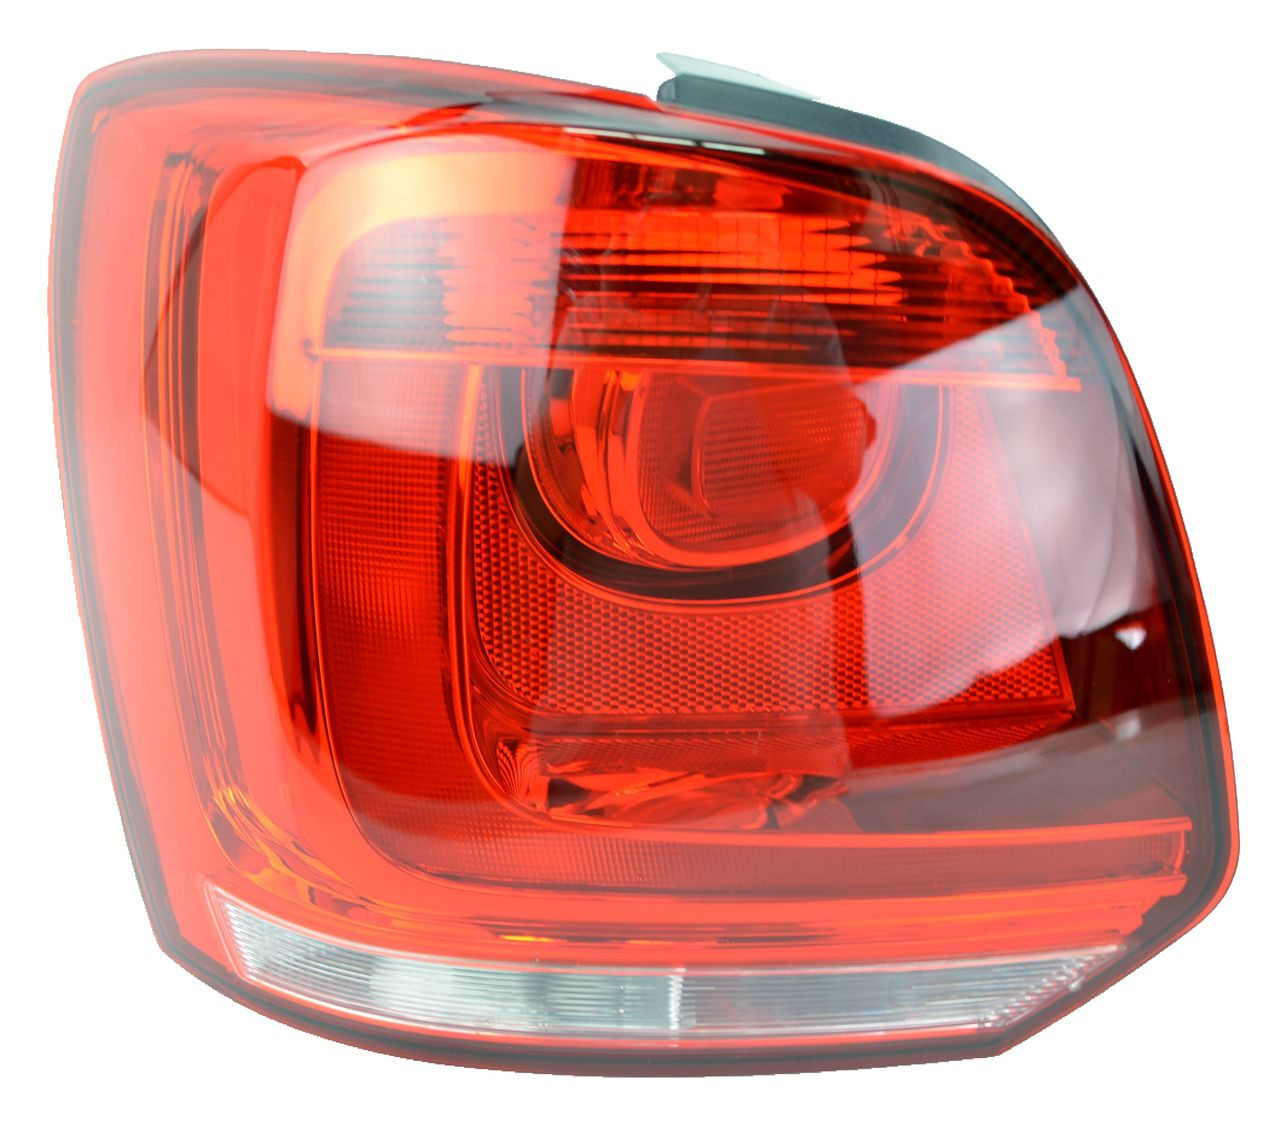 Tail light for Volkswagen VW Polo 6R 03/10-07/14 New Left Rear Lamp Hatch 11 12 13